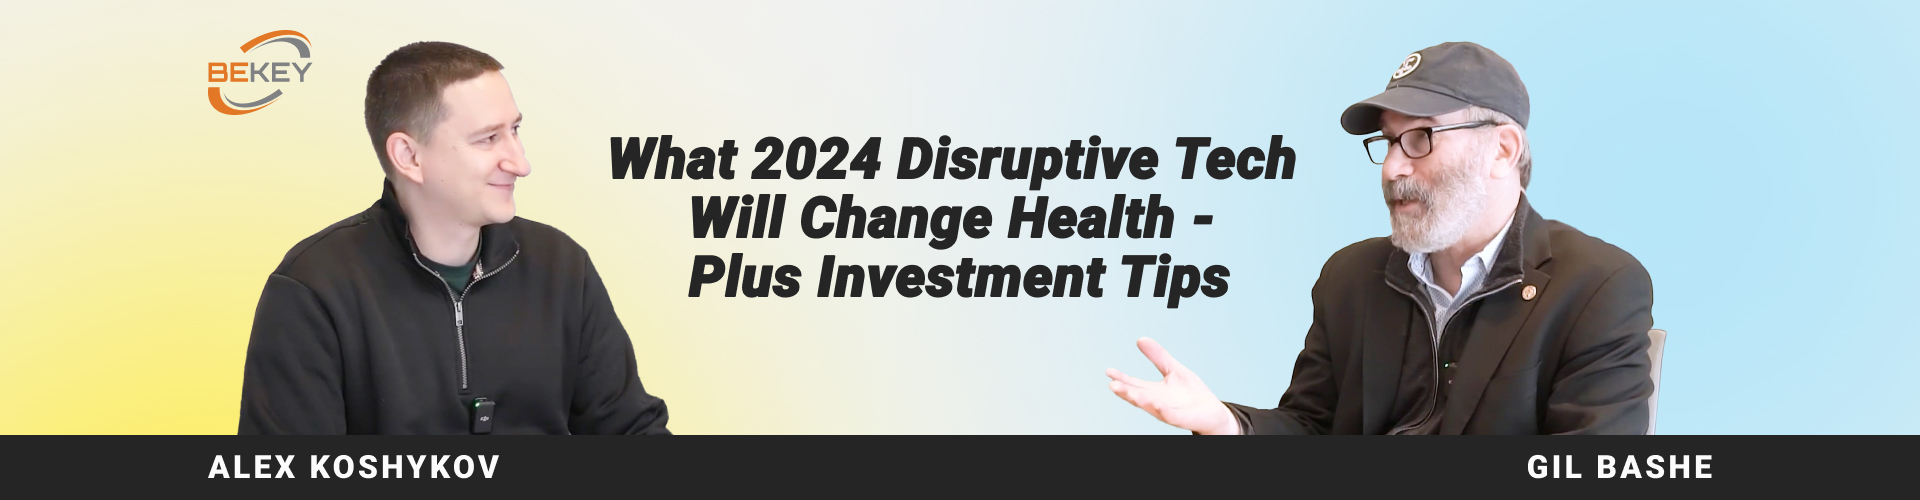 What 2024 Disruptive Tech Will Change Health + Investment Tips. Digital Health Interviews: Gil Bashe - image